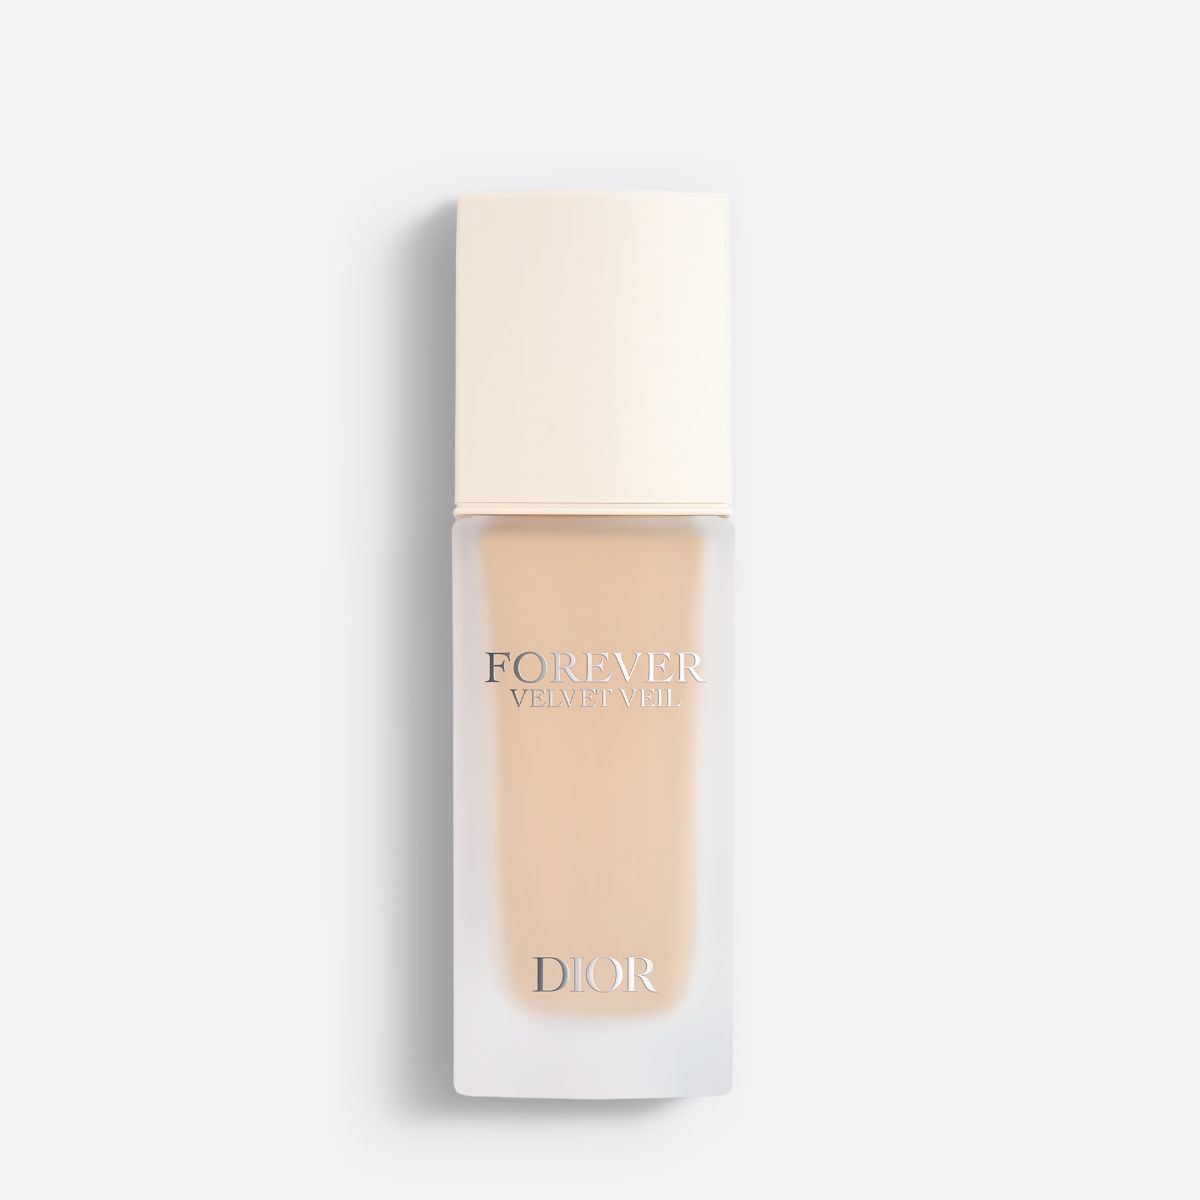 DIOR FOREVER VELVET VEIL ~ Clean Blurring Matte Primer - 24h Comfort and Matte Finish - Enriched with Floral Extracts